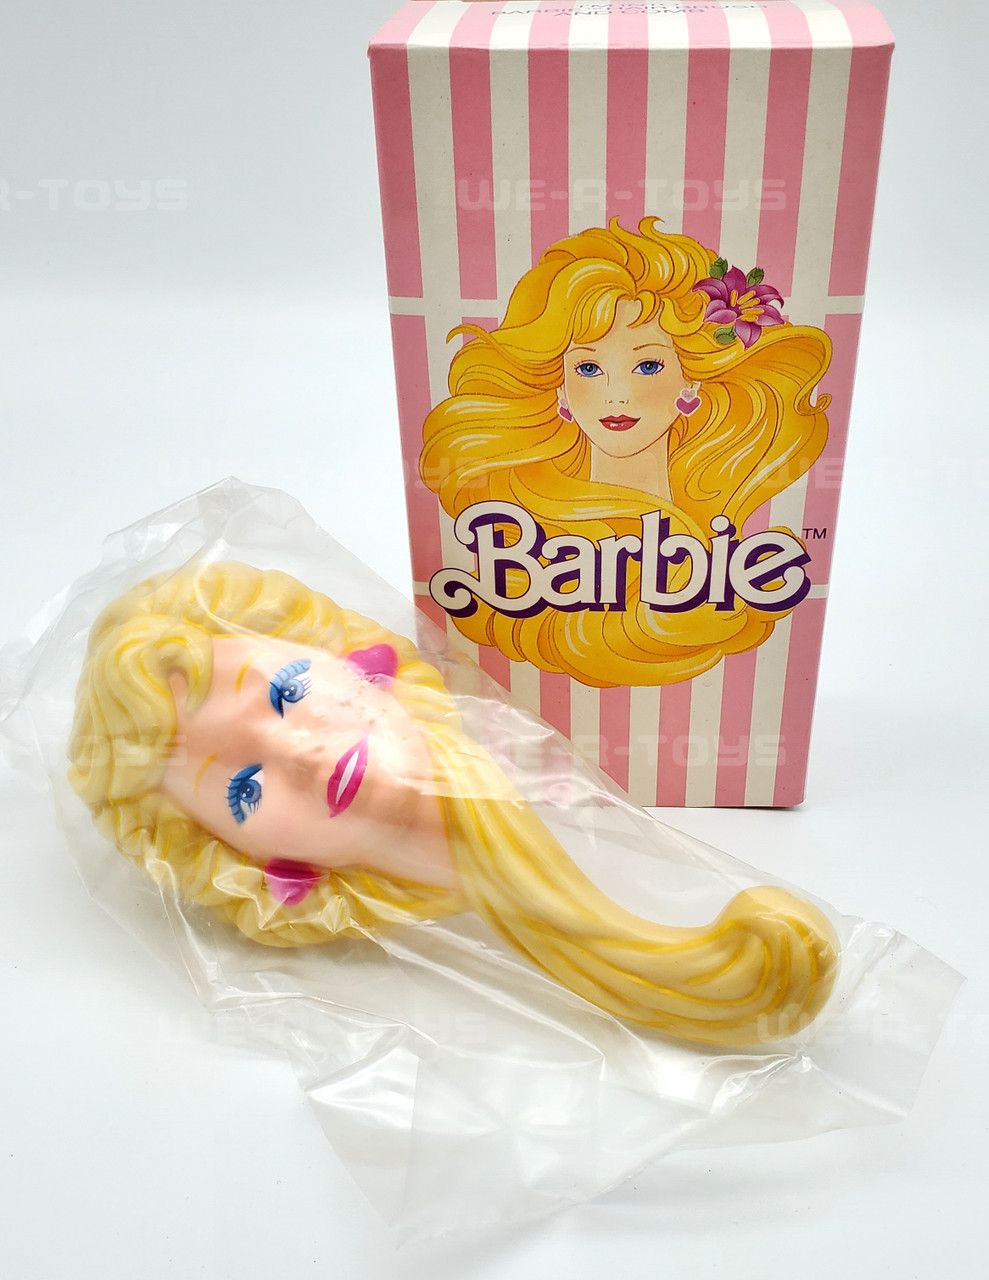 I'm Into Barbie Special Grooming Set Hair Brush and Comb Avon Mattel 1989  NEW - We-R-Toys